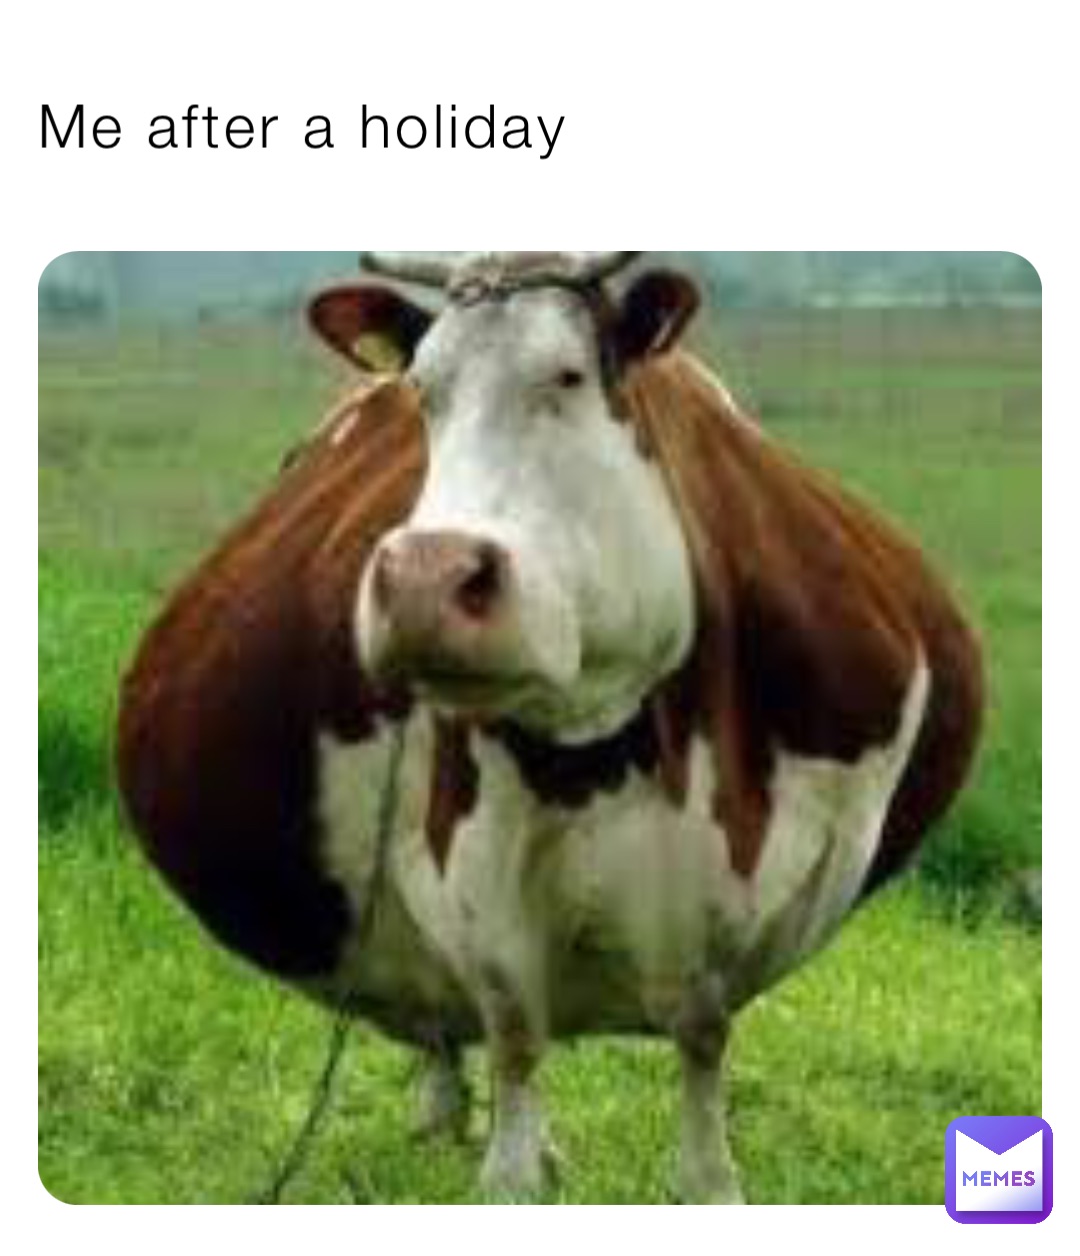 Me after a holiday